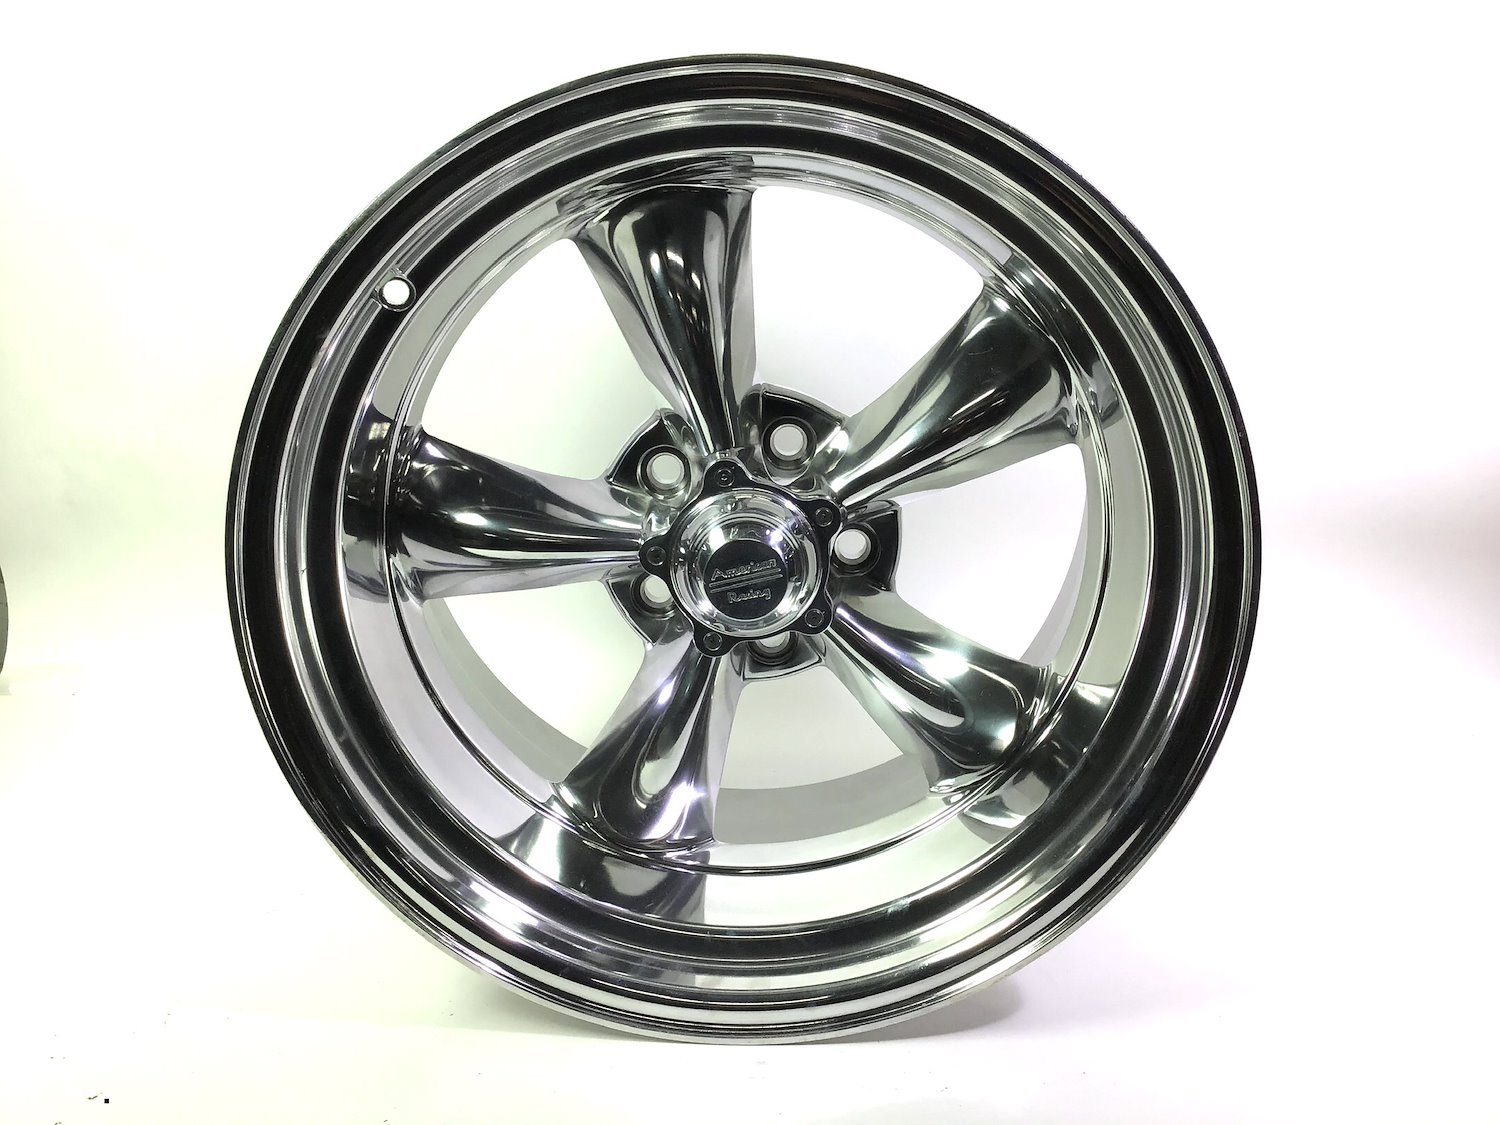 *BLEMISHED VN515 Series Classic Torq-Thrust II Wheel Size: